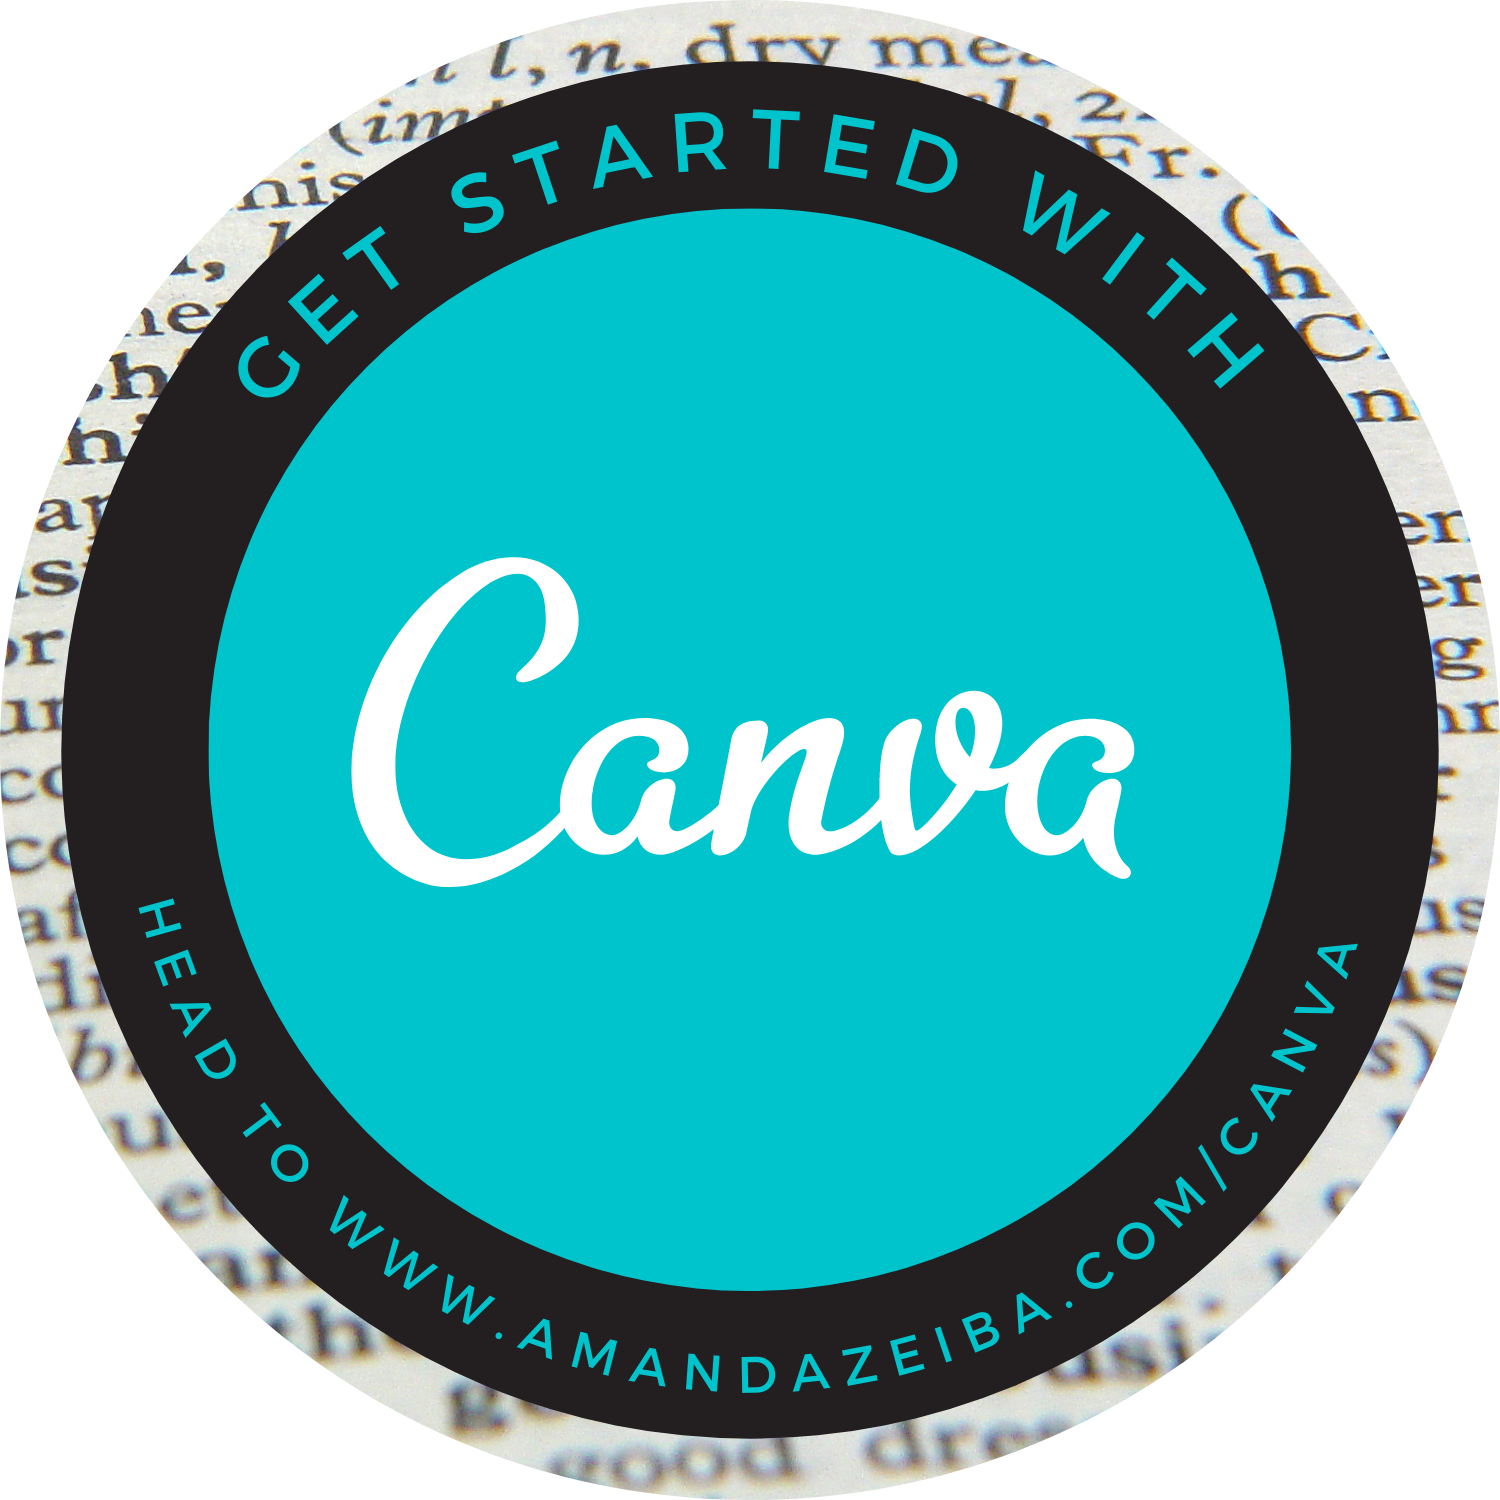 Get started with Canva today for FREE